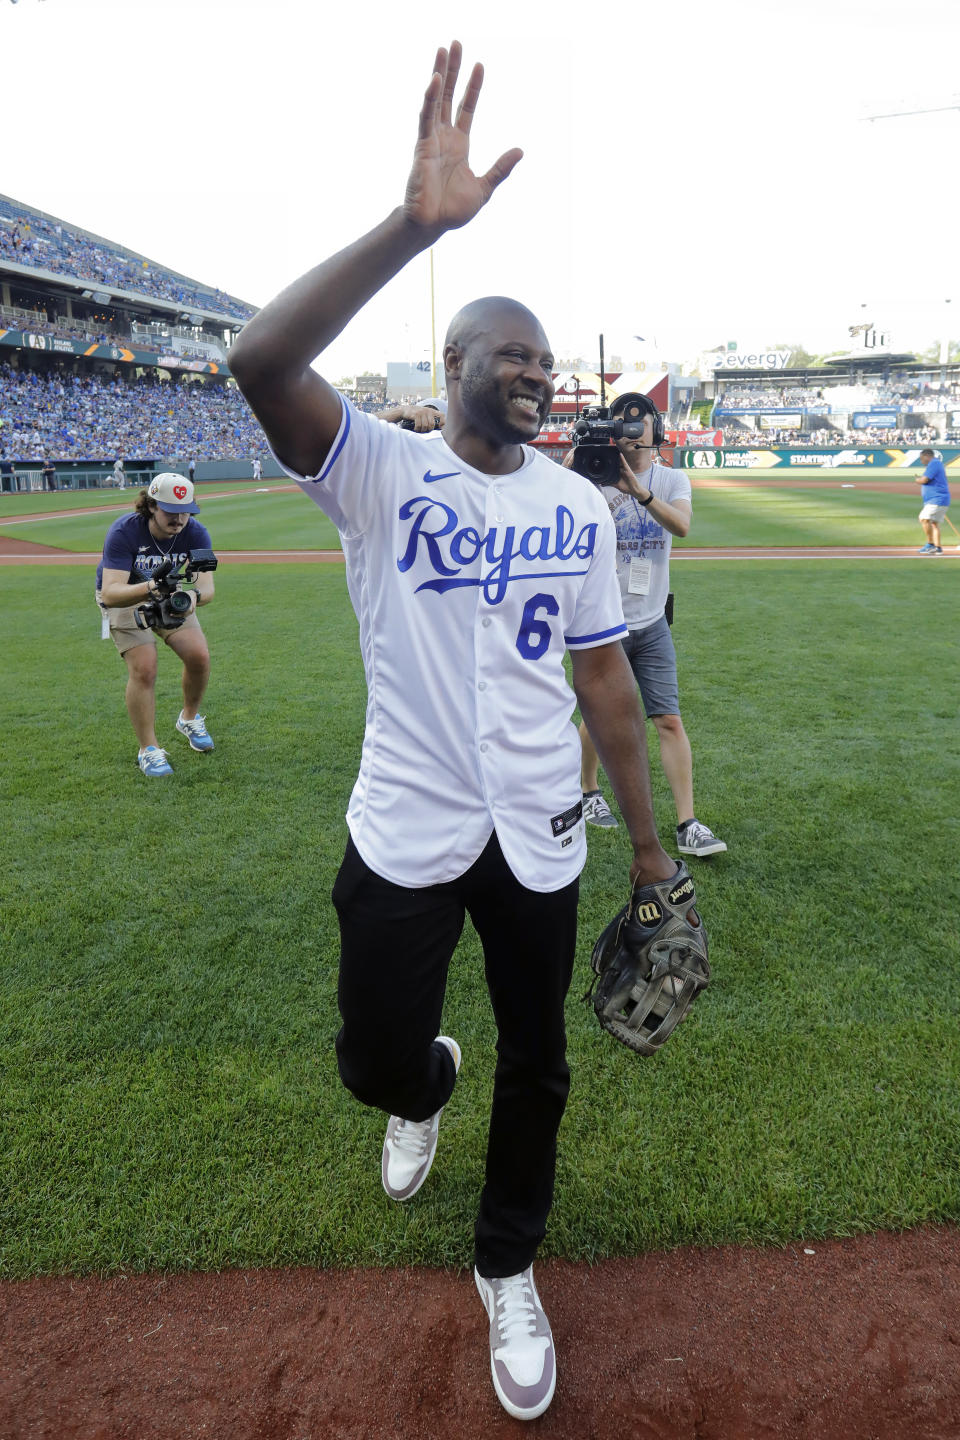 Former Kansas City Royals center fielder Lorenzo Cain waves to fans as he leaves the field after a retirement celebration before a baseball game against the Oakland Athletics in Kansas City, Mo., Saturday, May 6, 2023. Cain signed a one-day contract with the team so he could retire as a Royal. (AP Photo/Colin E. Braley)